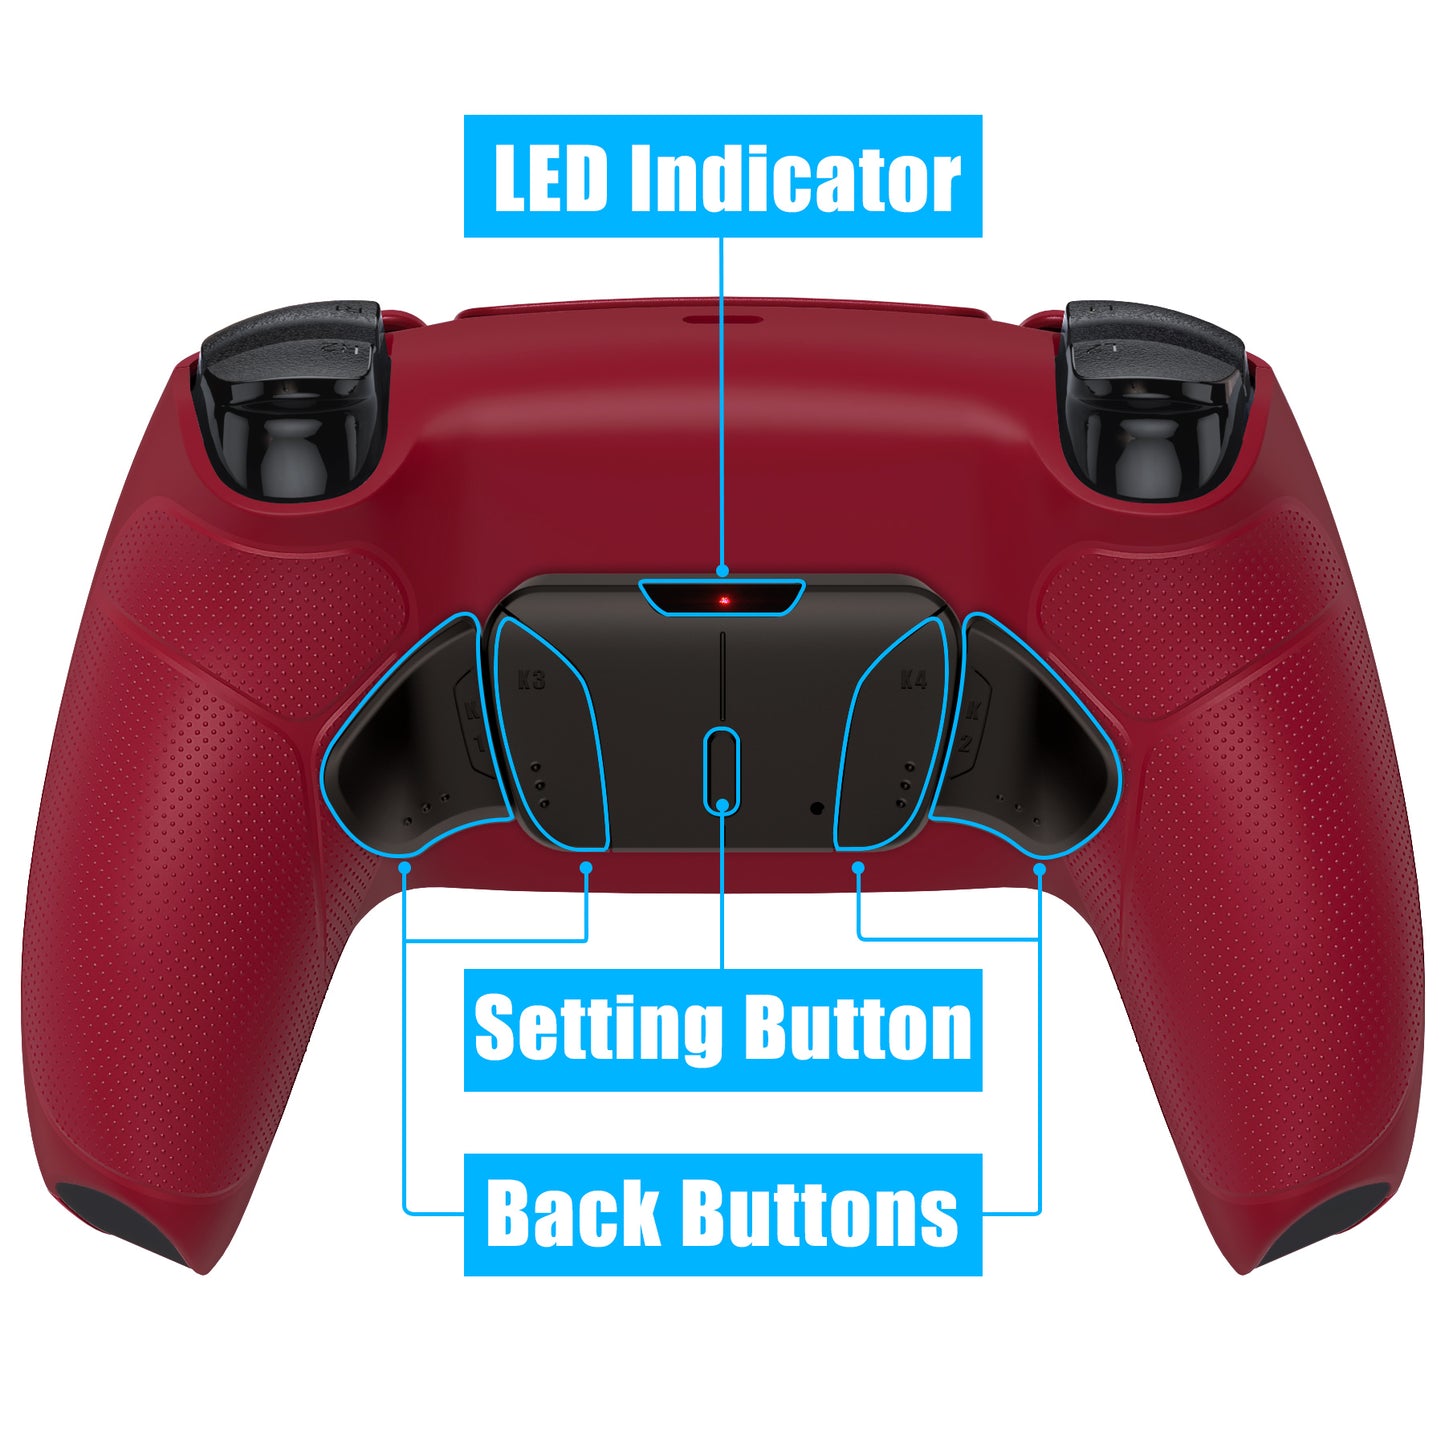 eXtremeRate Black Real Metal Buttons (RMB) Version RISE 4.0 Remap Kit for PS5 Controller BDM-030/040 - Rubberized Volcanic Red eXtremeRate